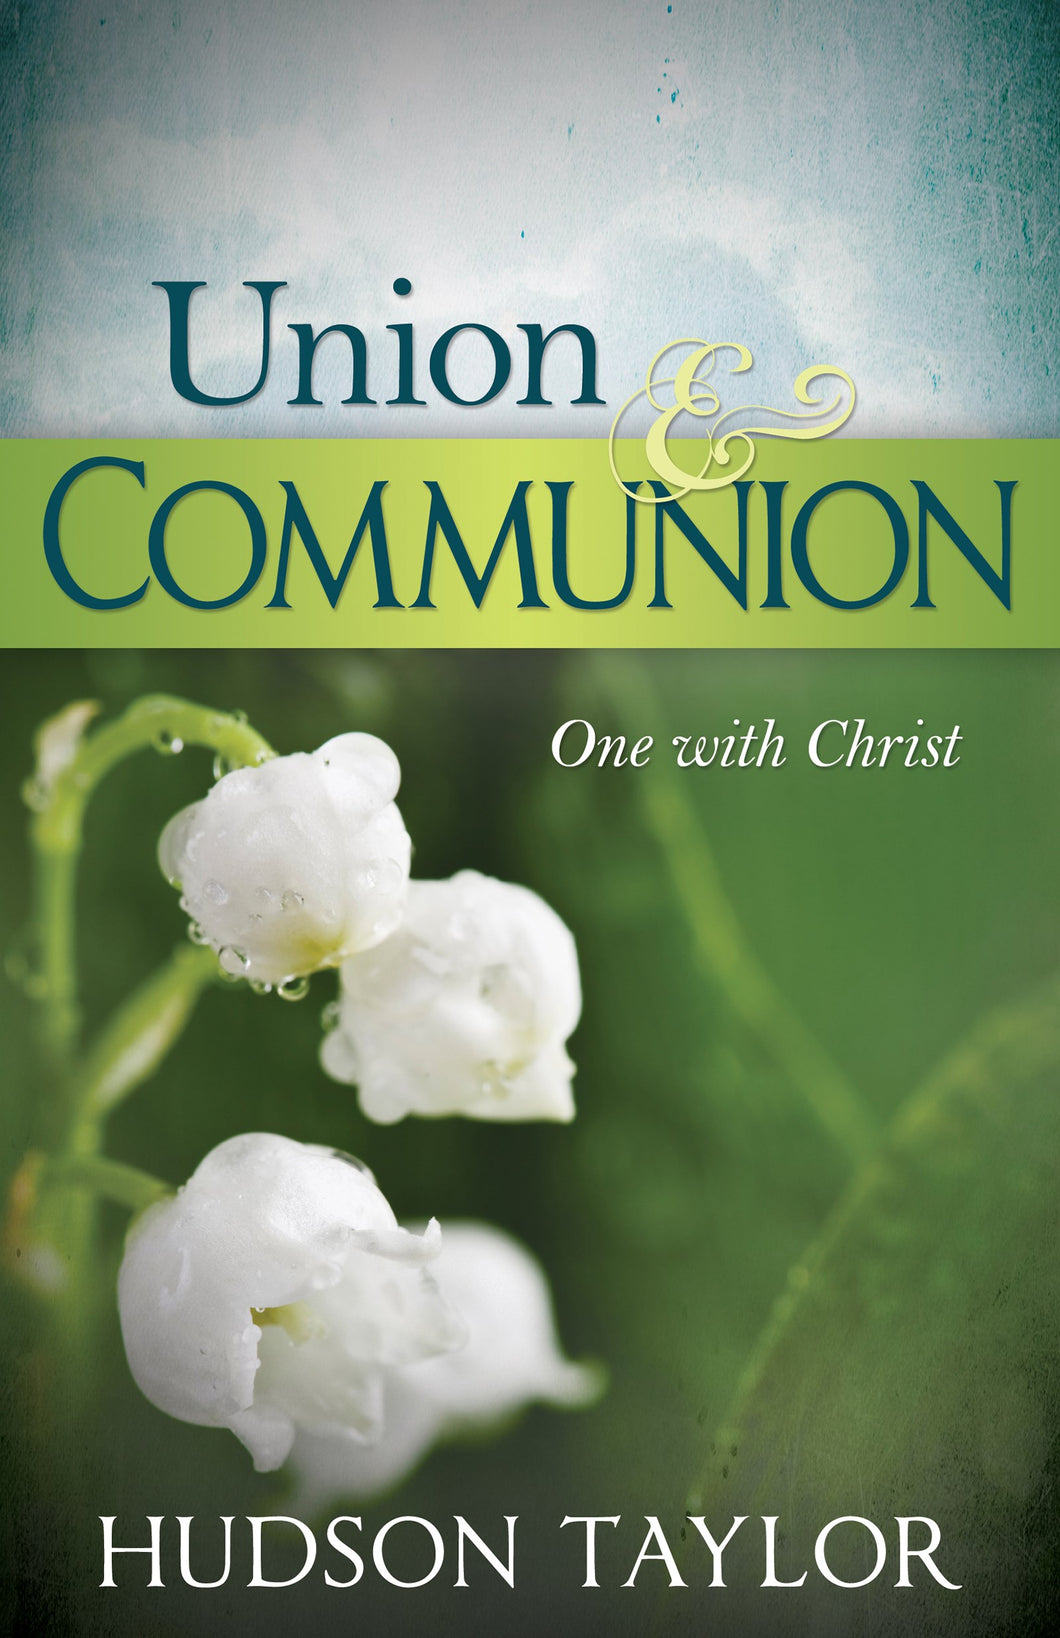 Union & Communion: One With Christ